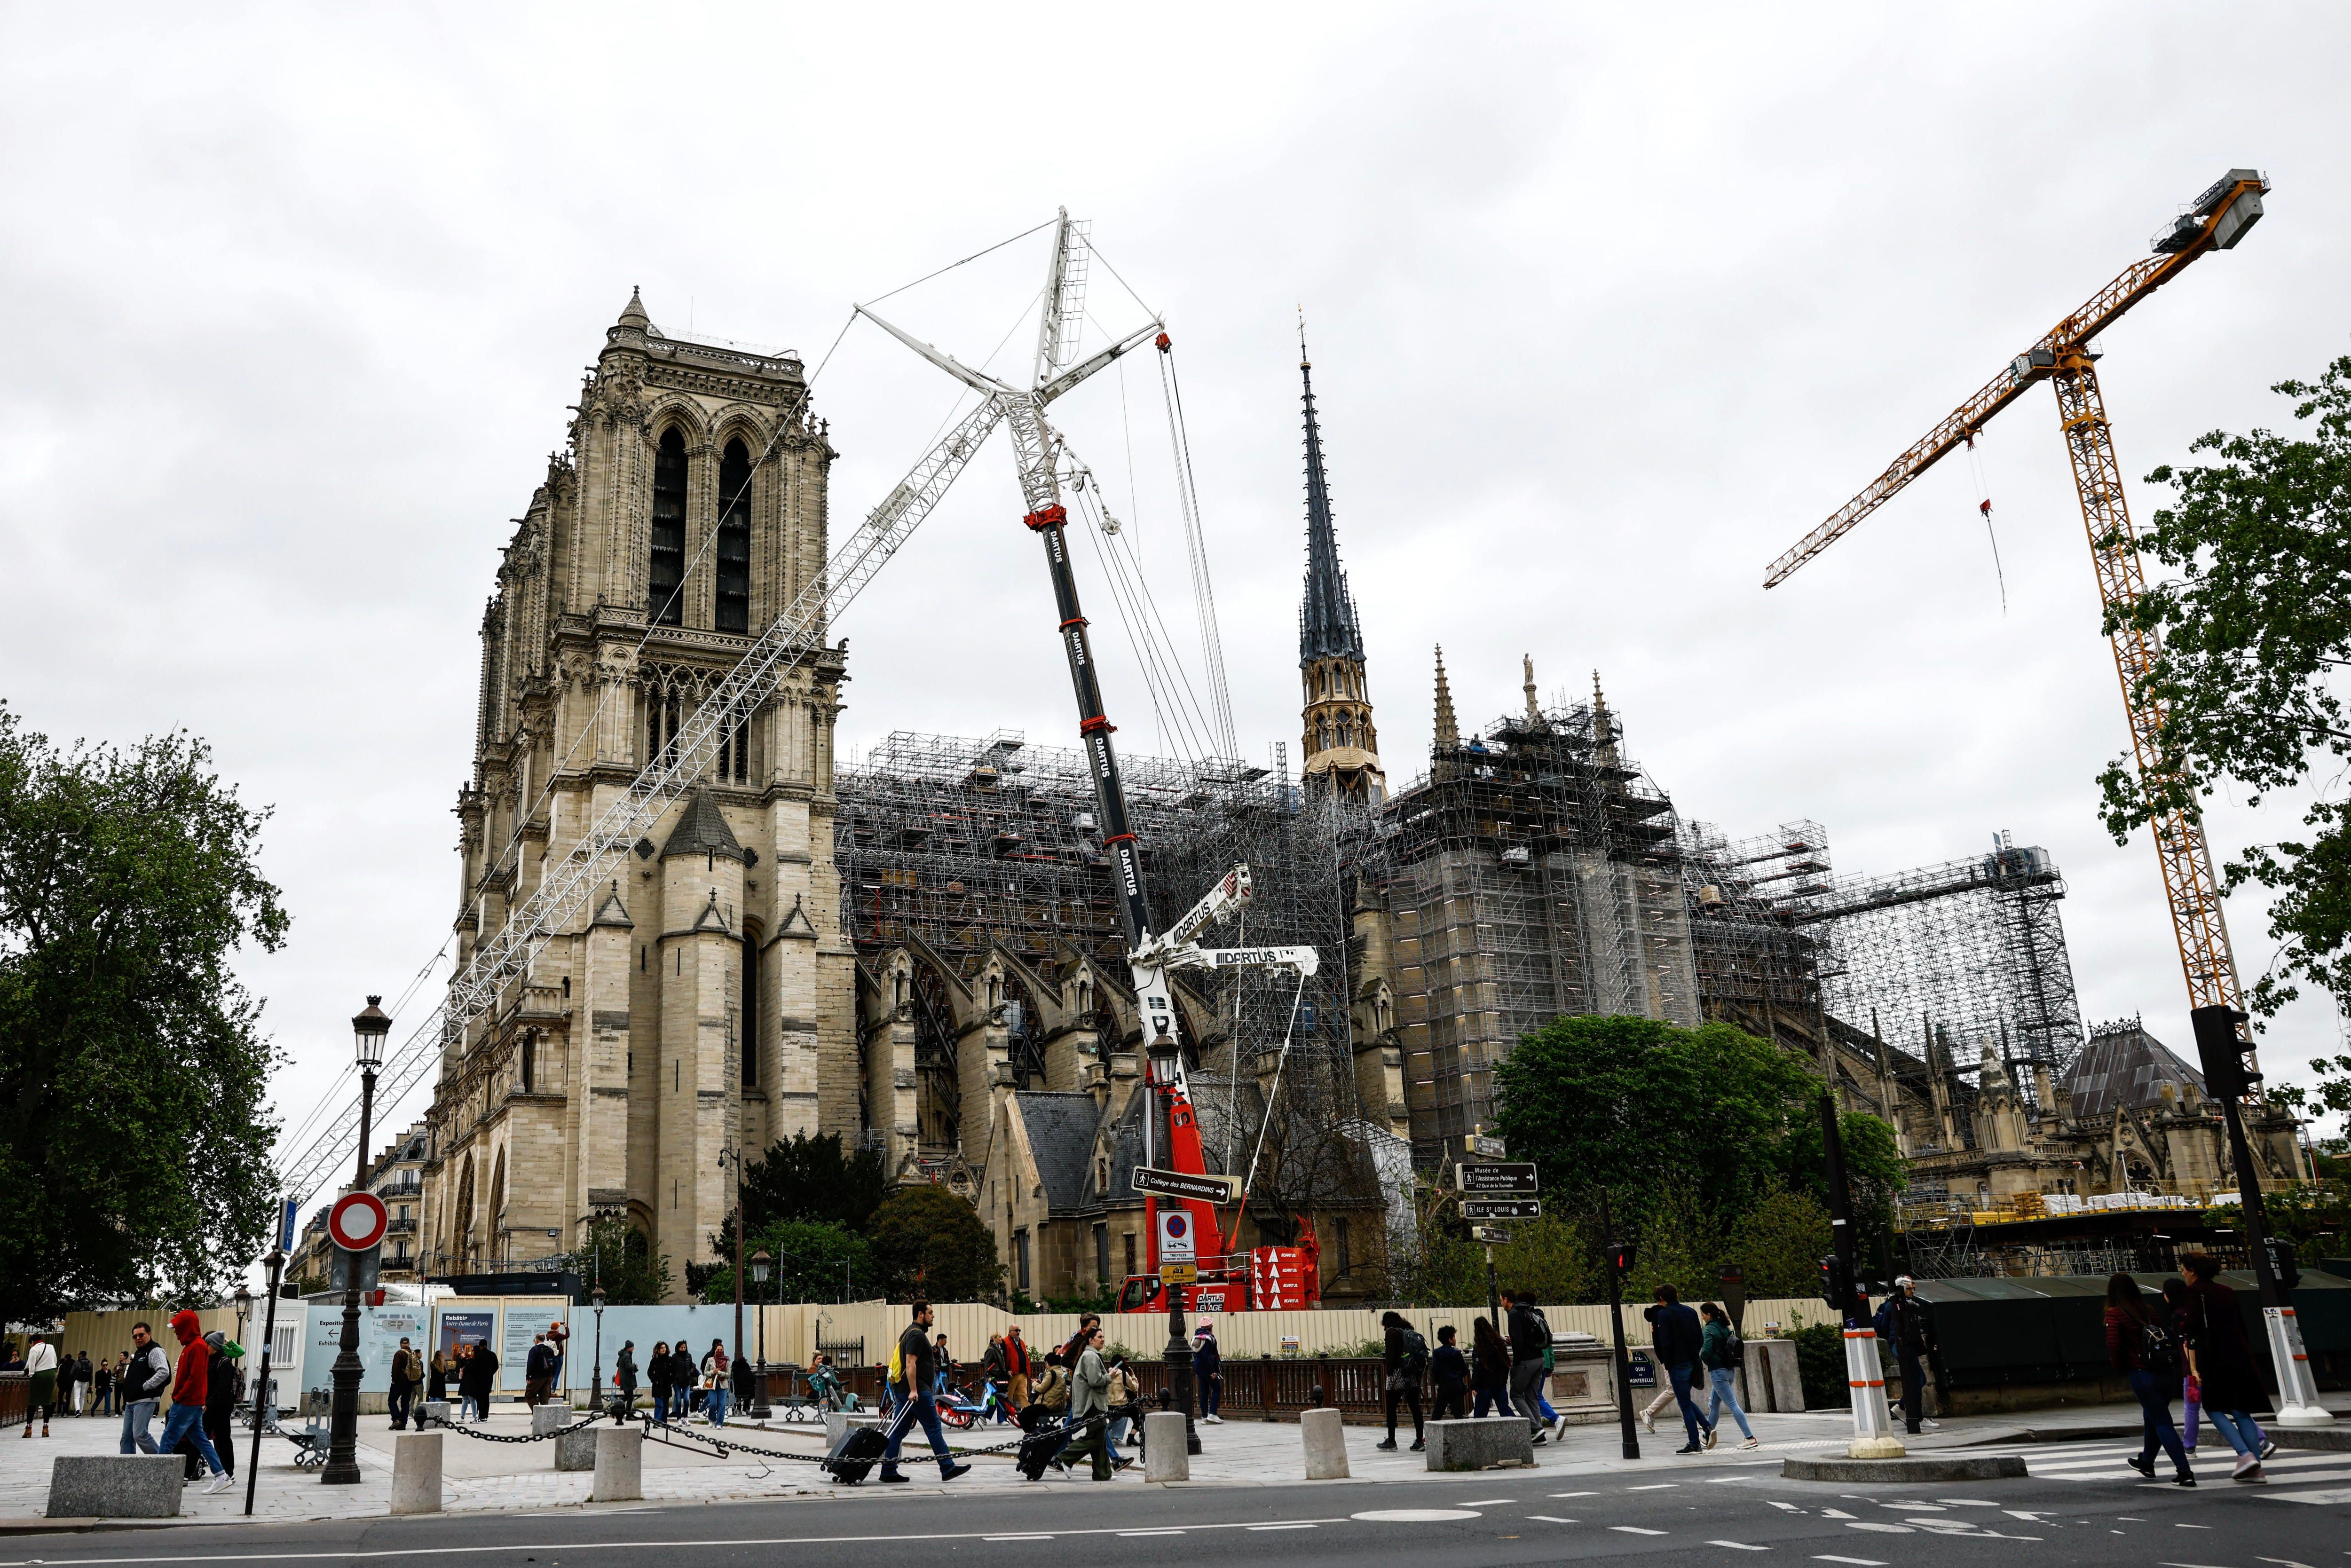 Paris (France), 15/04/2024.- A general view shows the Notre-Dame Cathedral with its giant crane and scaffolding, in Paris, France, 15 April 2024. Five years on since the collapse of the Notre-Dame cathedral's spire in a devastating fire on 15 April 2019, its reopening is scheduled for December 2024, according to Philippe Jost, president of the public body overseeing its reconstruction. (Francia) EFE/EPA/MOHAMMED BADRA
